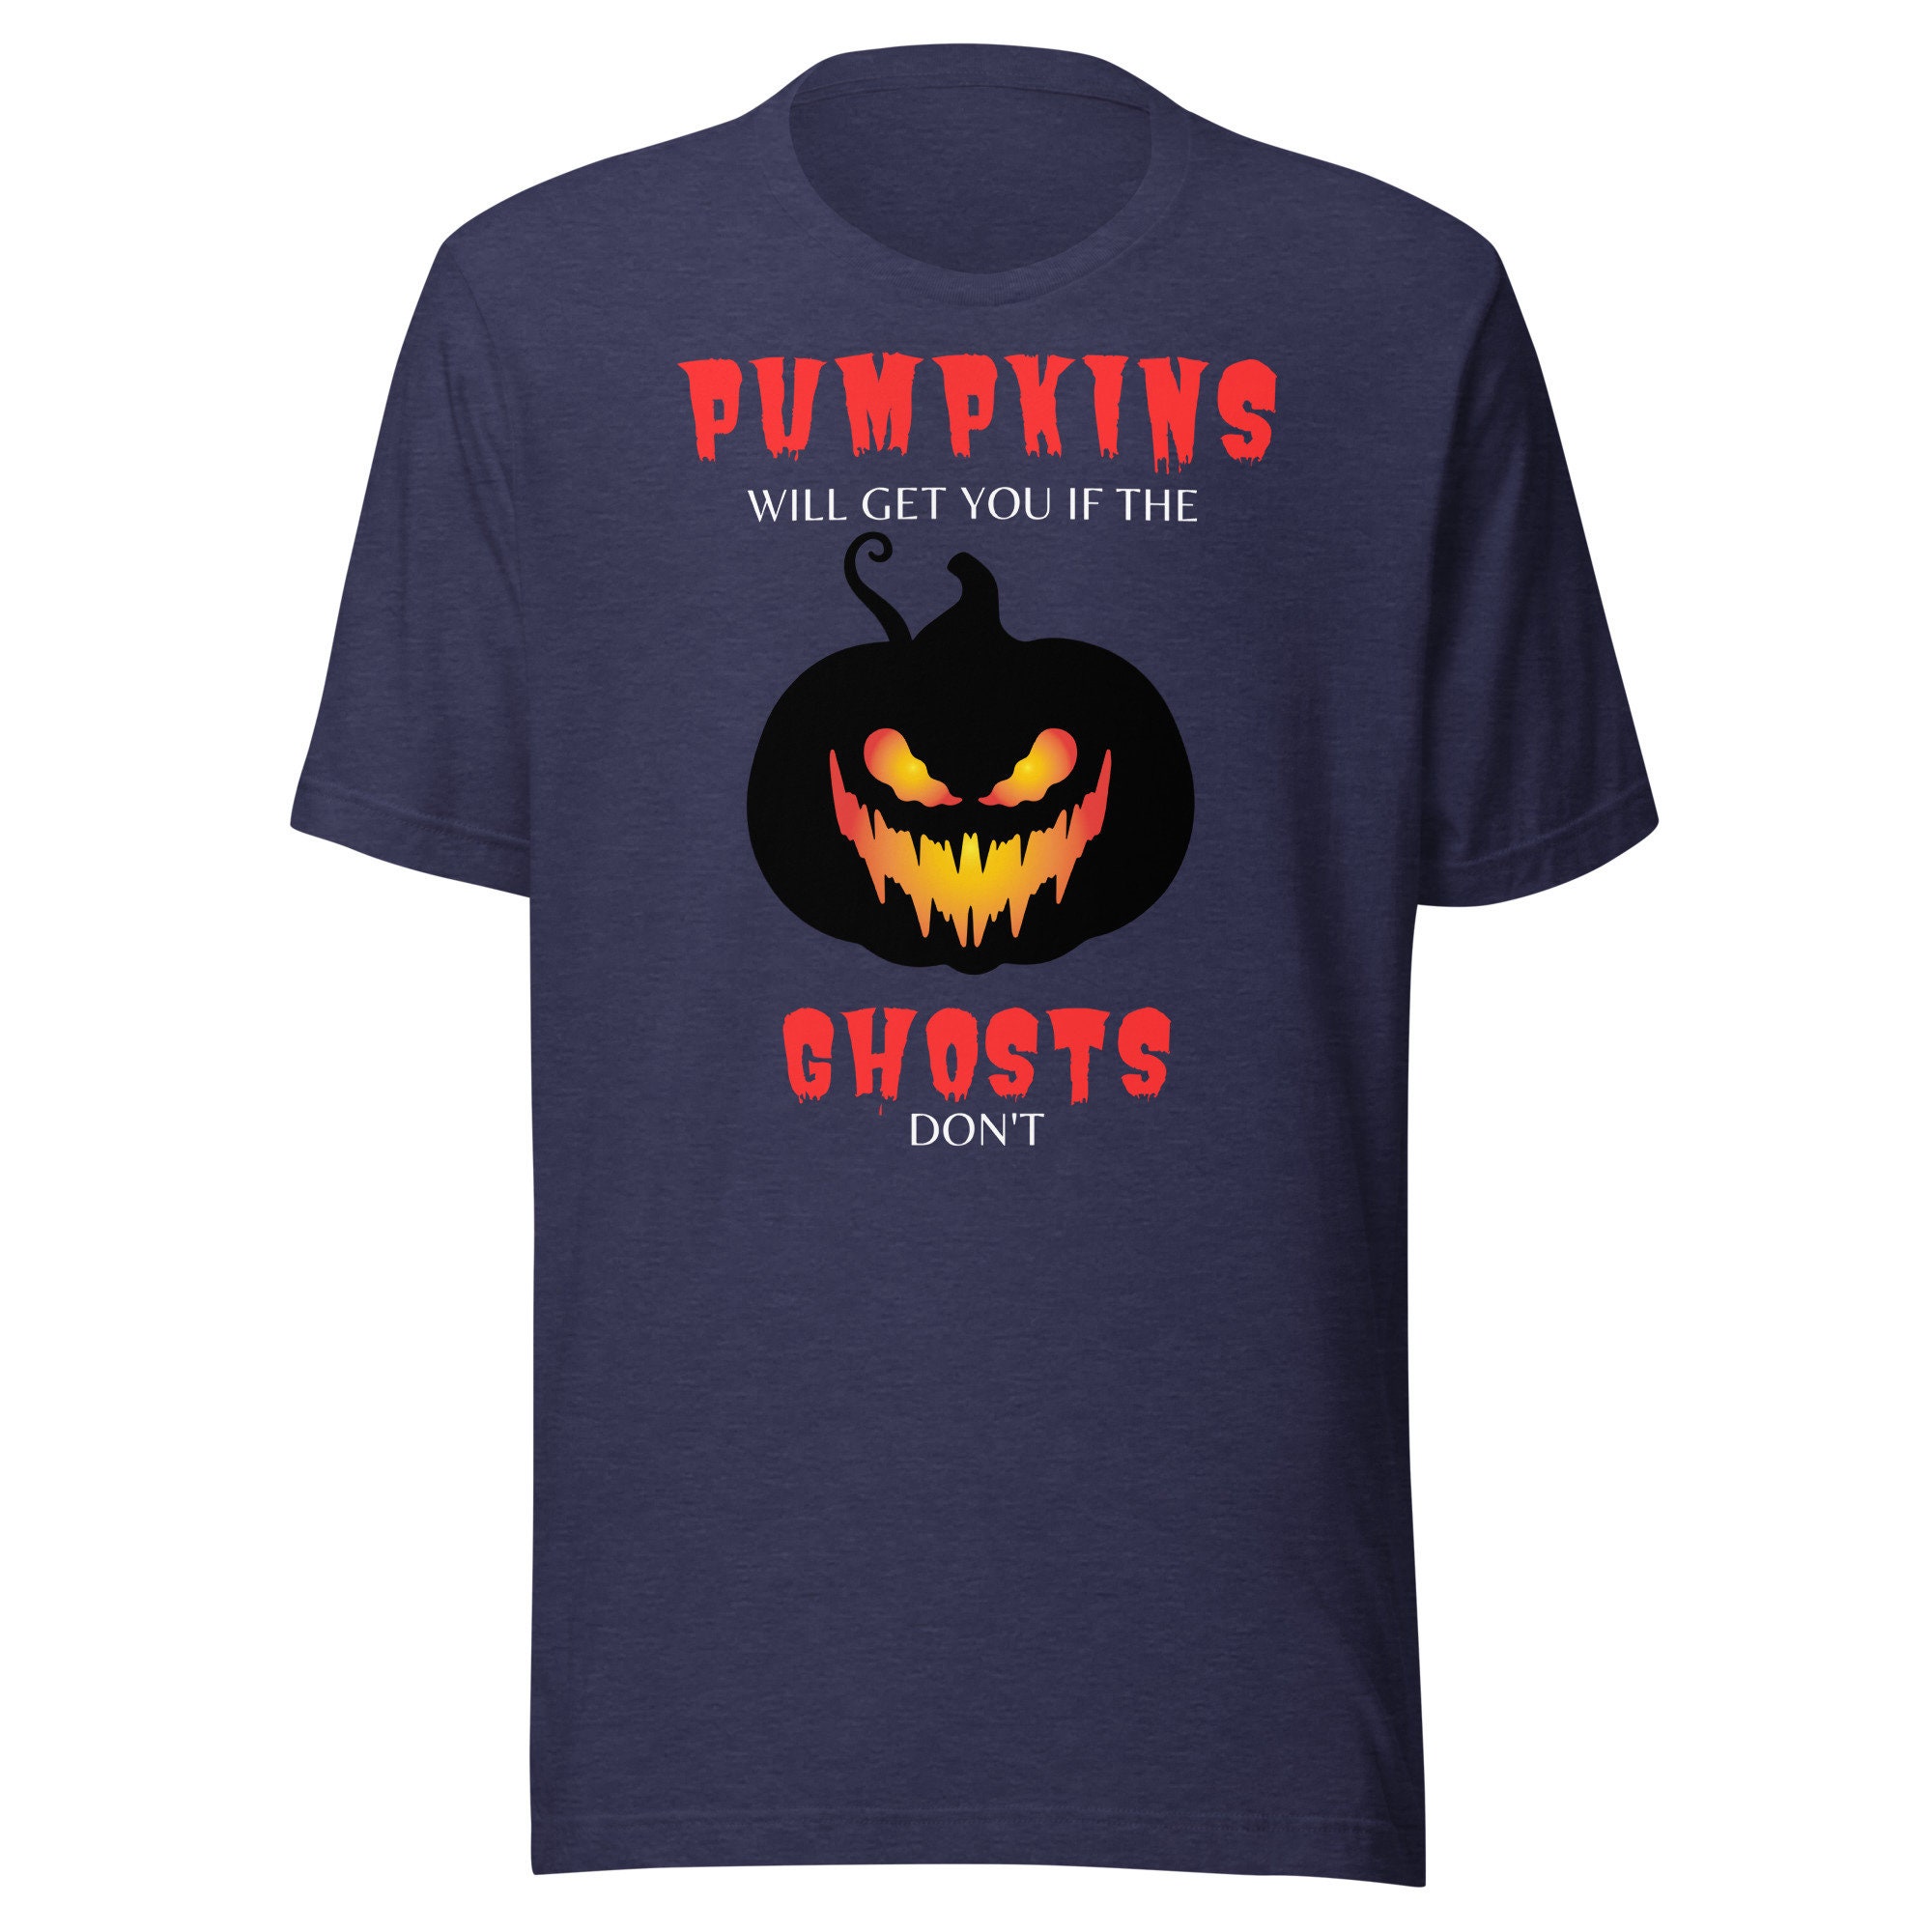 Discover pumpkins will get you if the ghosts don't T-shirt